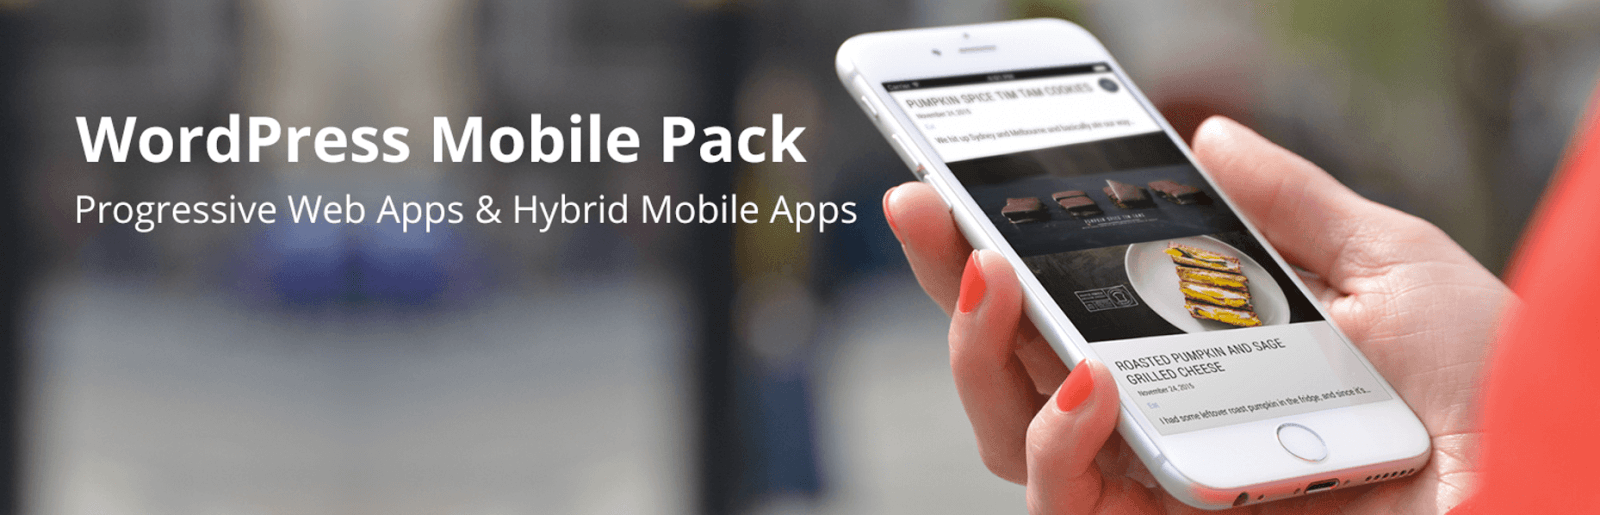 wordpress mobile pack for web apps